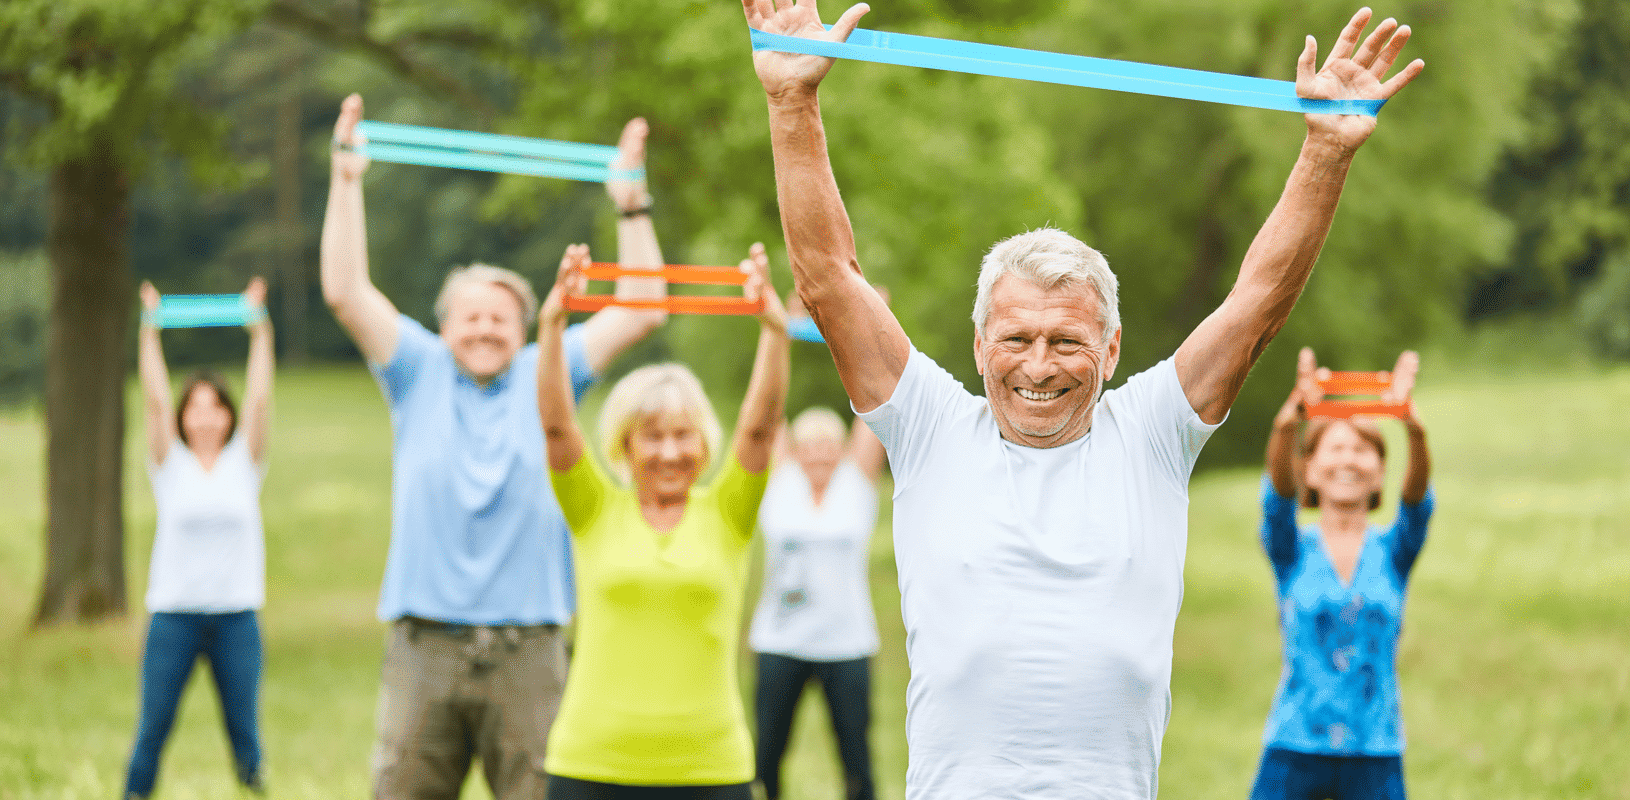 The Best Workout Gear for Active Seniors - SilverSneakers